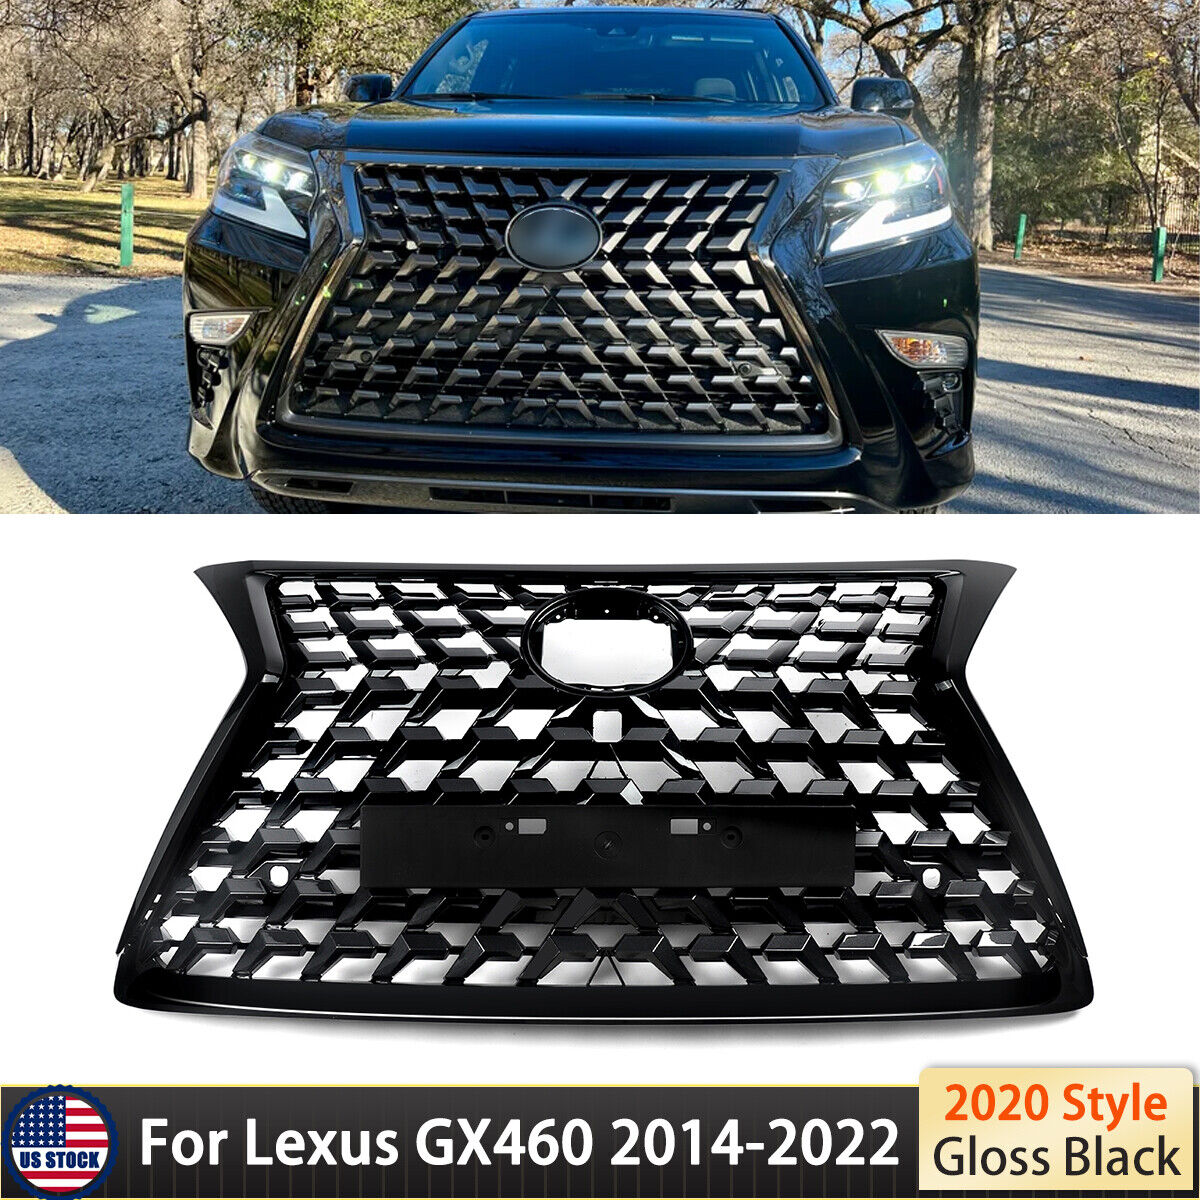 For 2014-2022 Lexus GX460 Front Upper Grille Gloss Black 2020 Style Luxury Grill